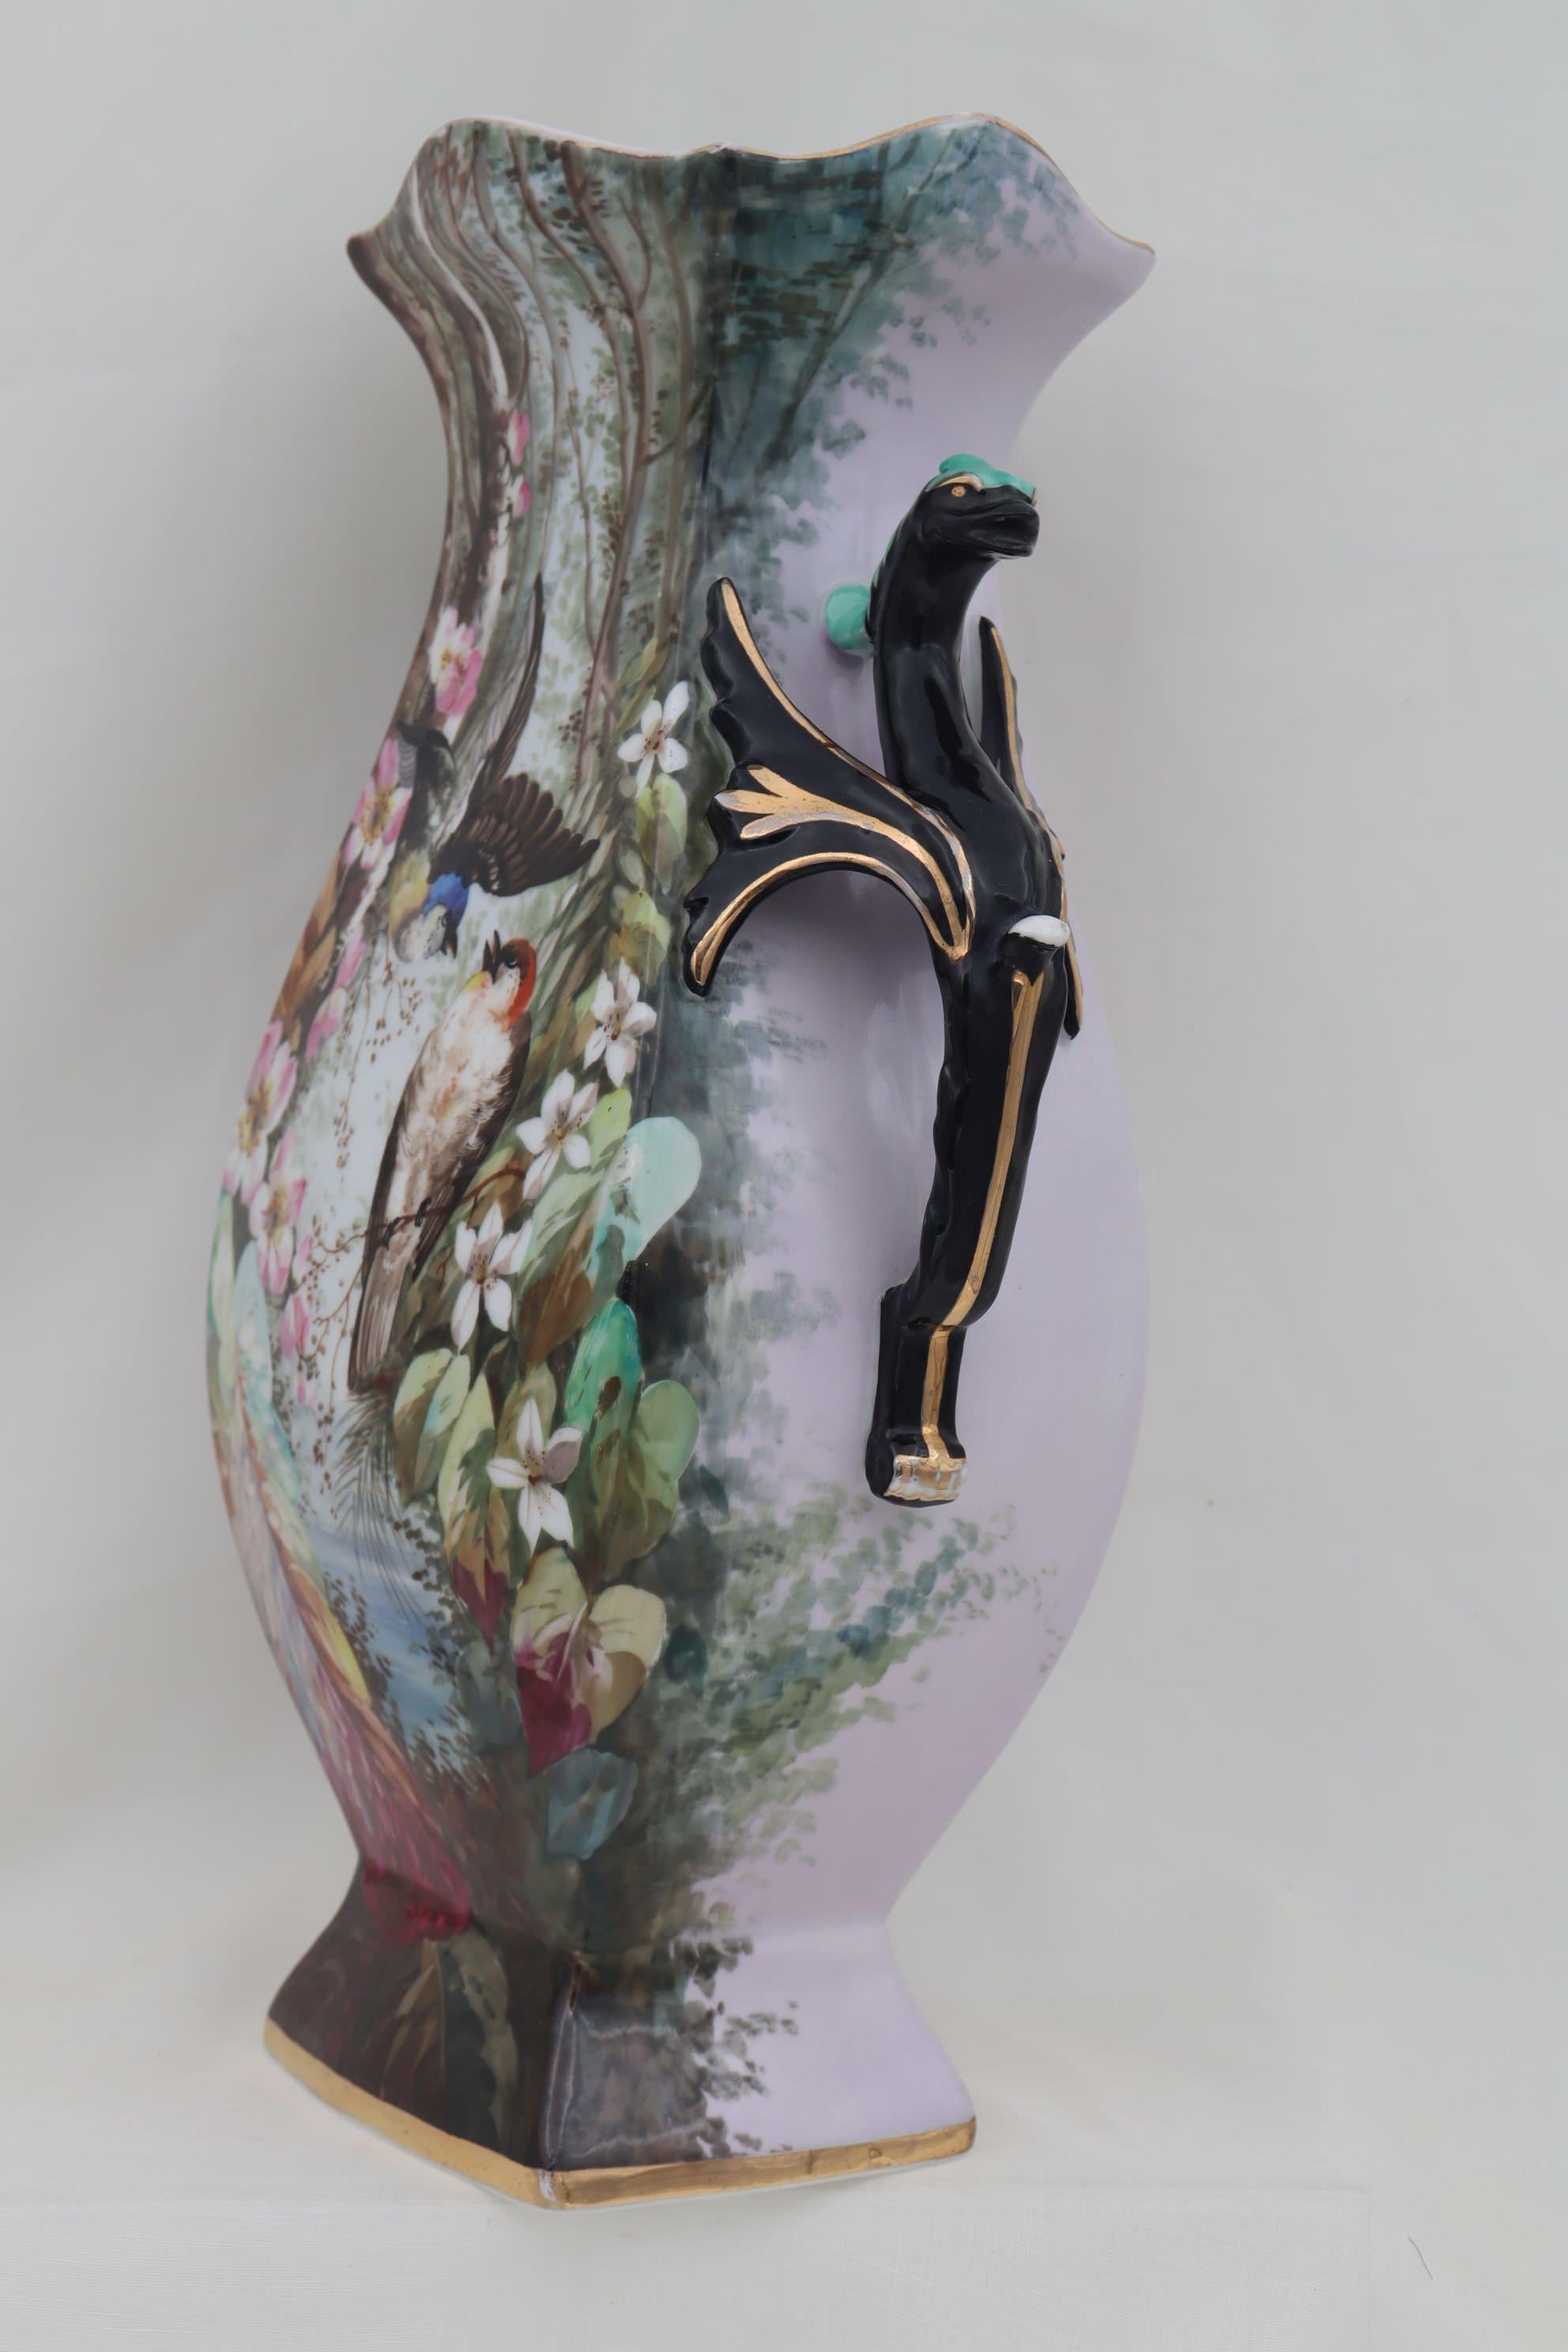 This large French porcelain hand painted and gilded vase features two colourful birds perched on branches in a forest setting surrounded by blossoms and coloured leaves, on a pale lilac ground. The handles are mythical winged serpents and their